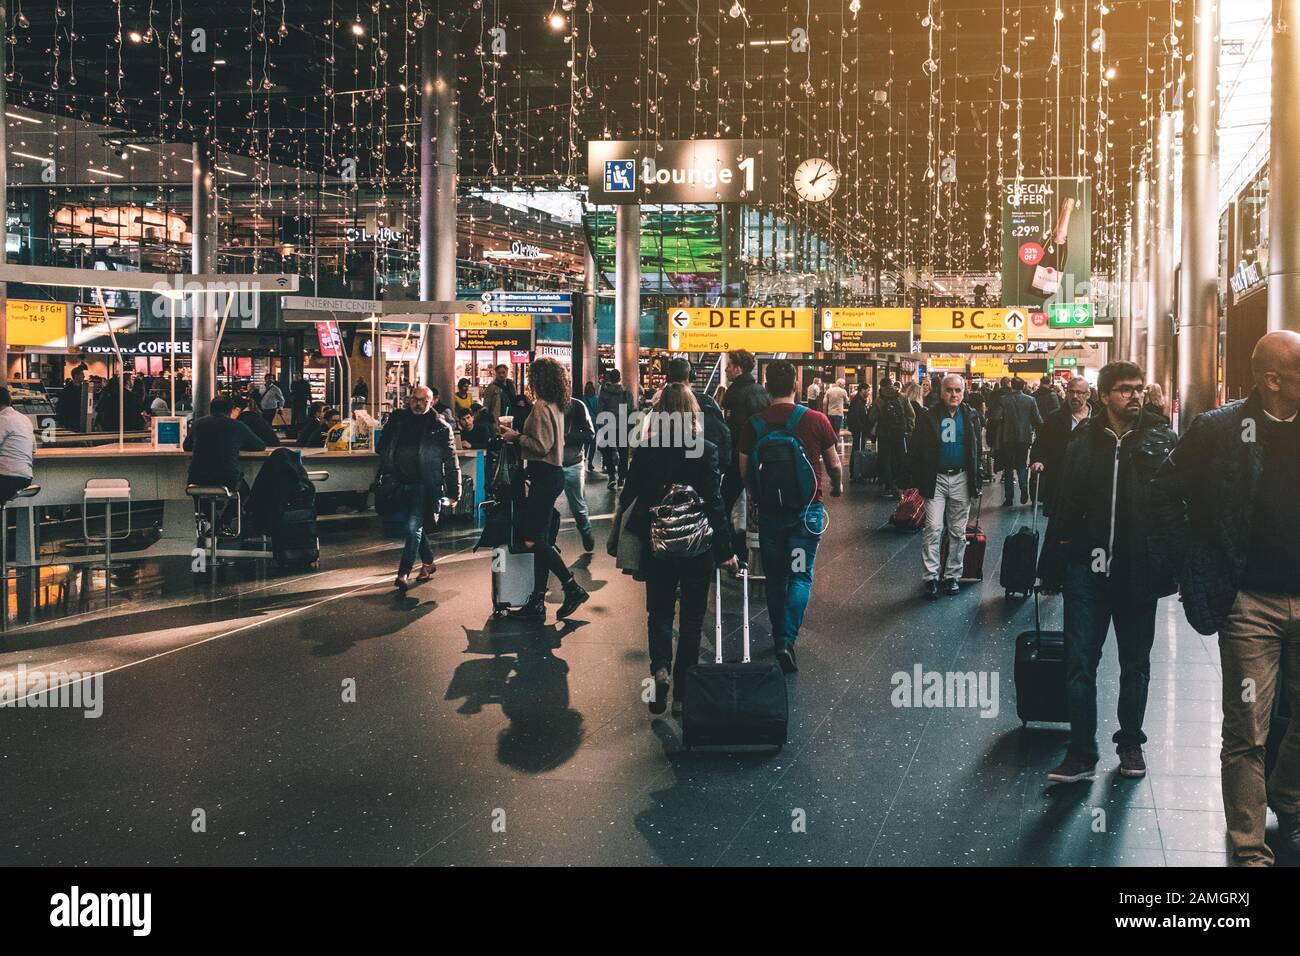 Amsterdam, Netherlands - November, 2019: People on airport (Schipol airport) in Amsterdam Stock Photo